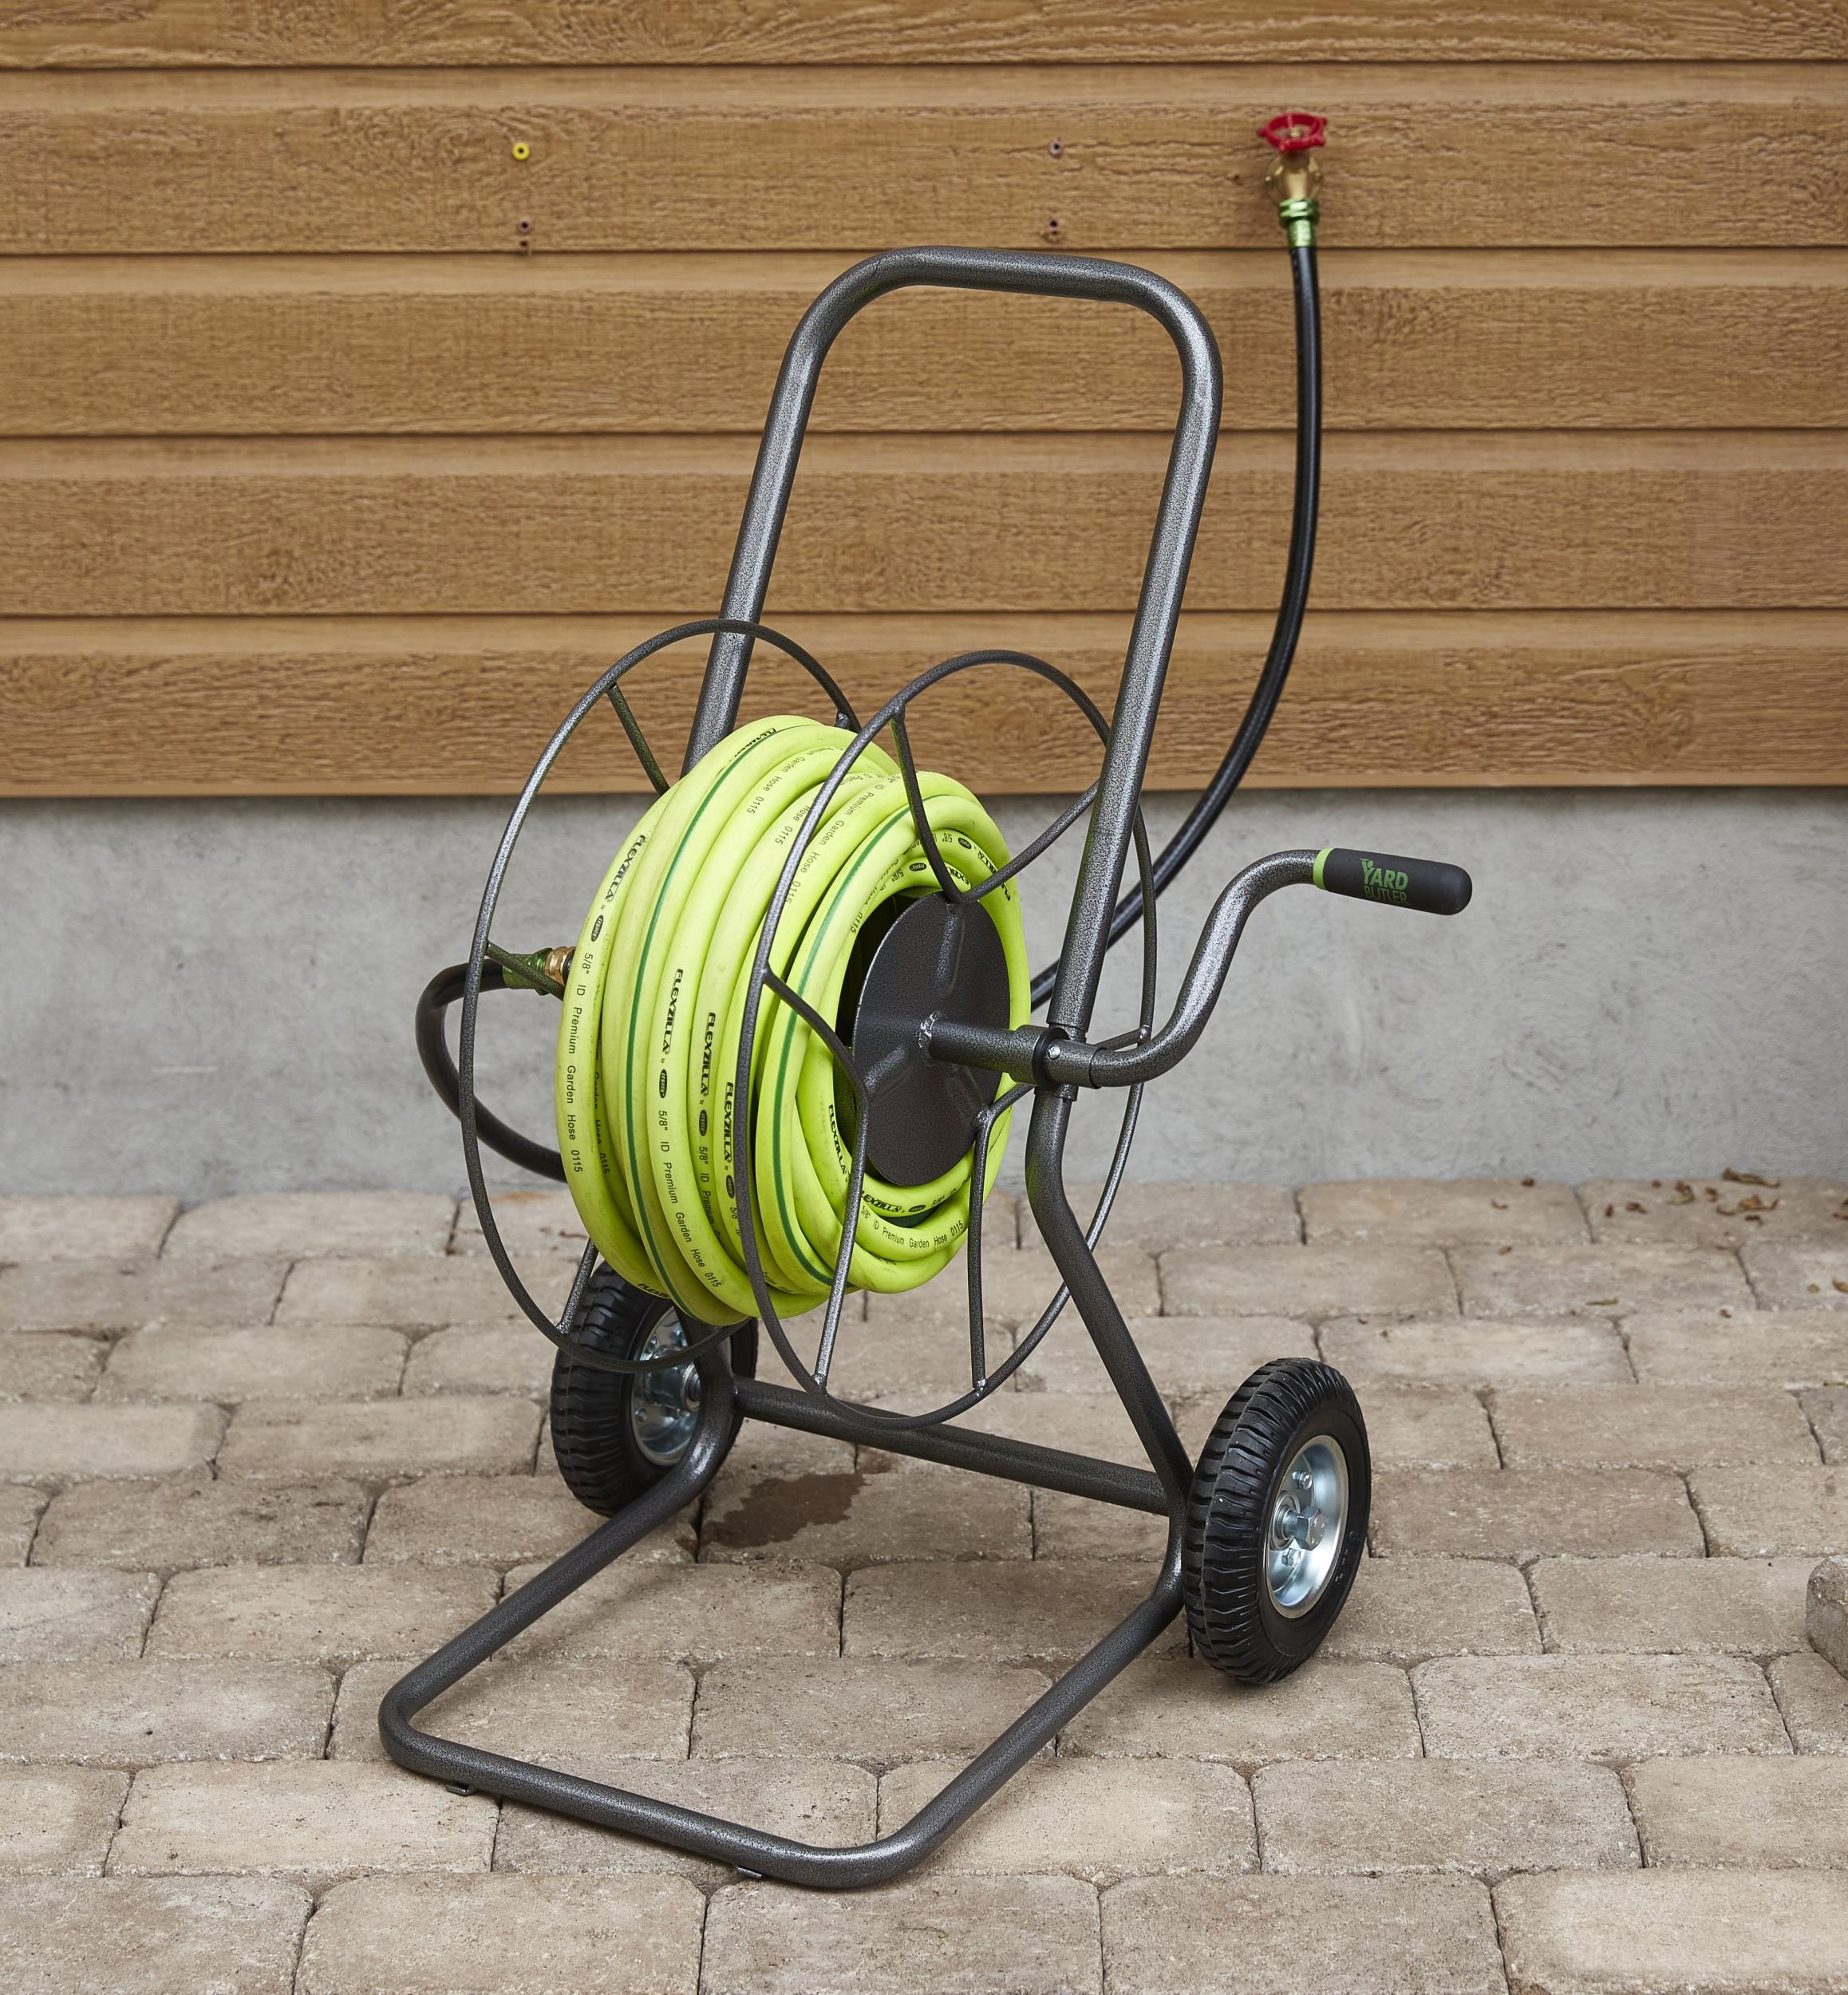 Search stainless steel hose reel cart